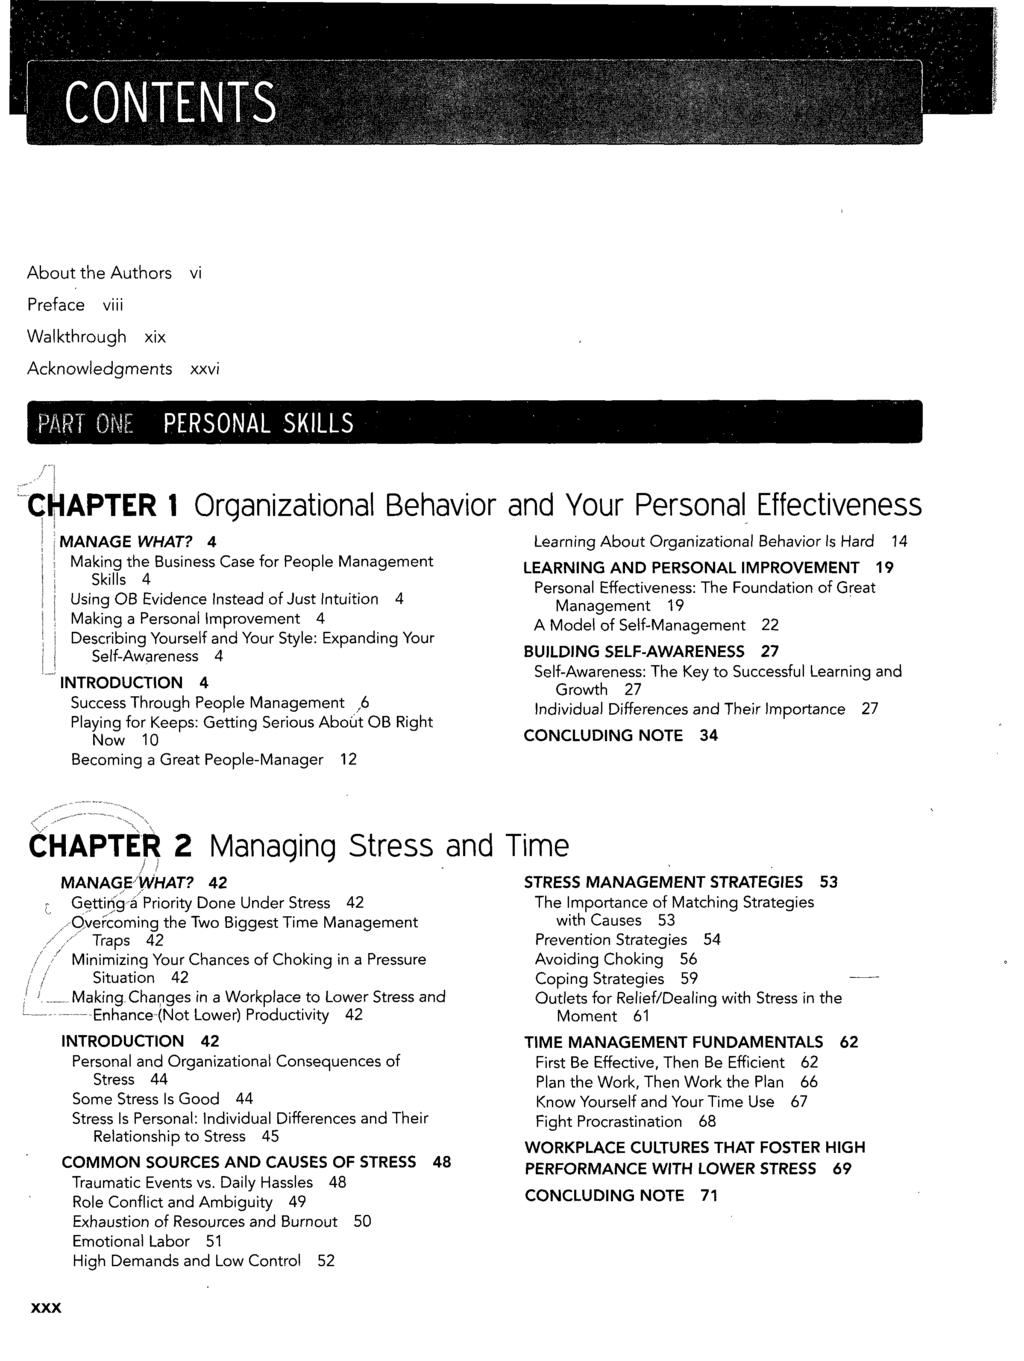 CONTE, About the Authors vi Preface viii Walkthrough xix Acknowledgments xxvi PART ONE PERSONAL SKILLS CHAPTER 1 Organizational Behavior and Your Personal Effectiveness MANAGE WHAT?